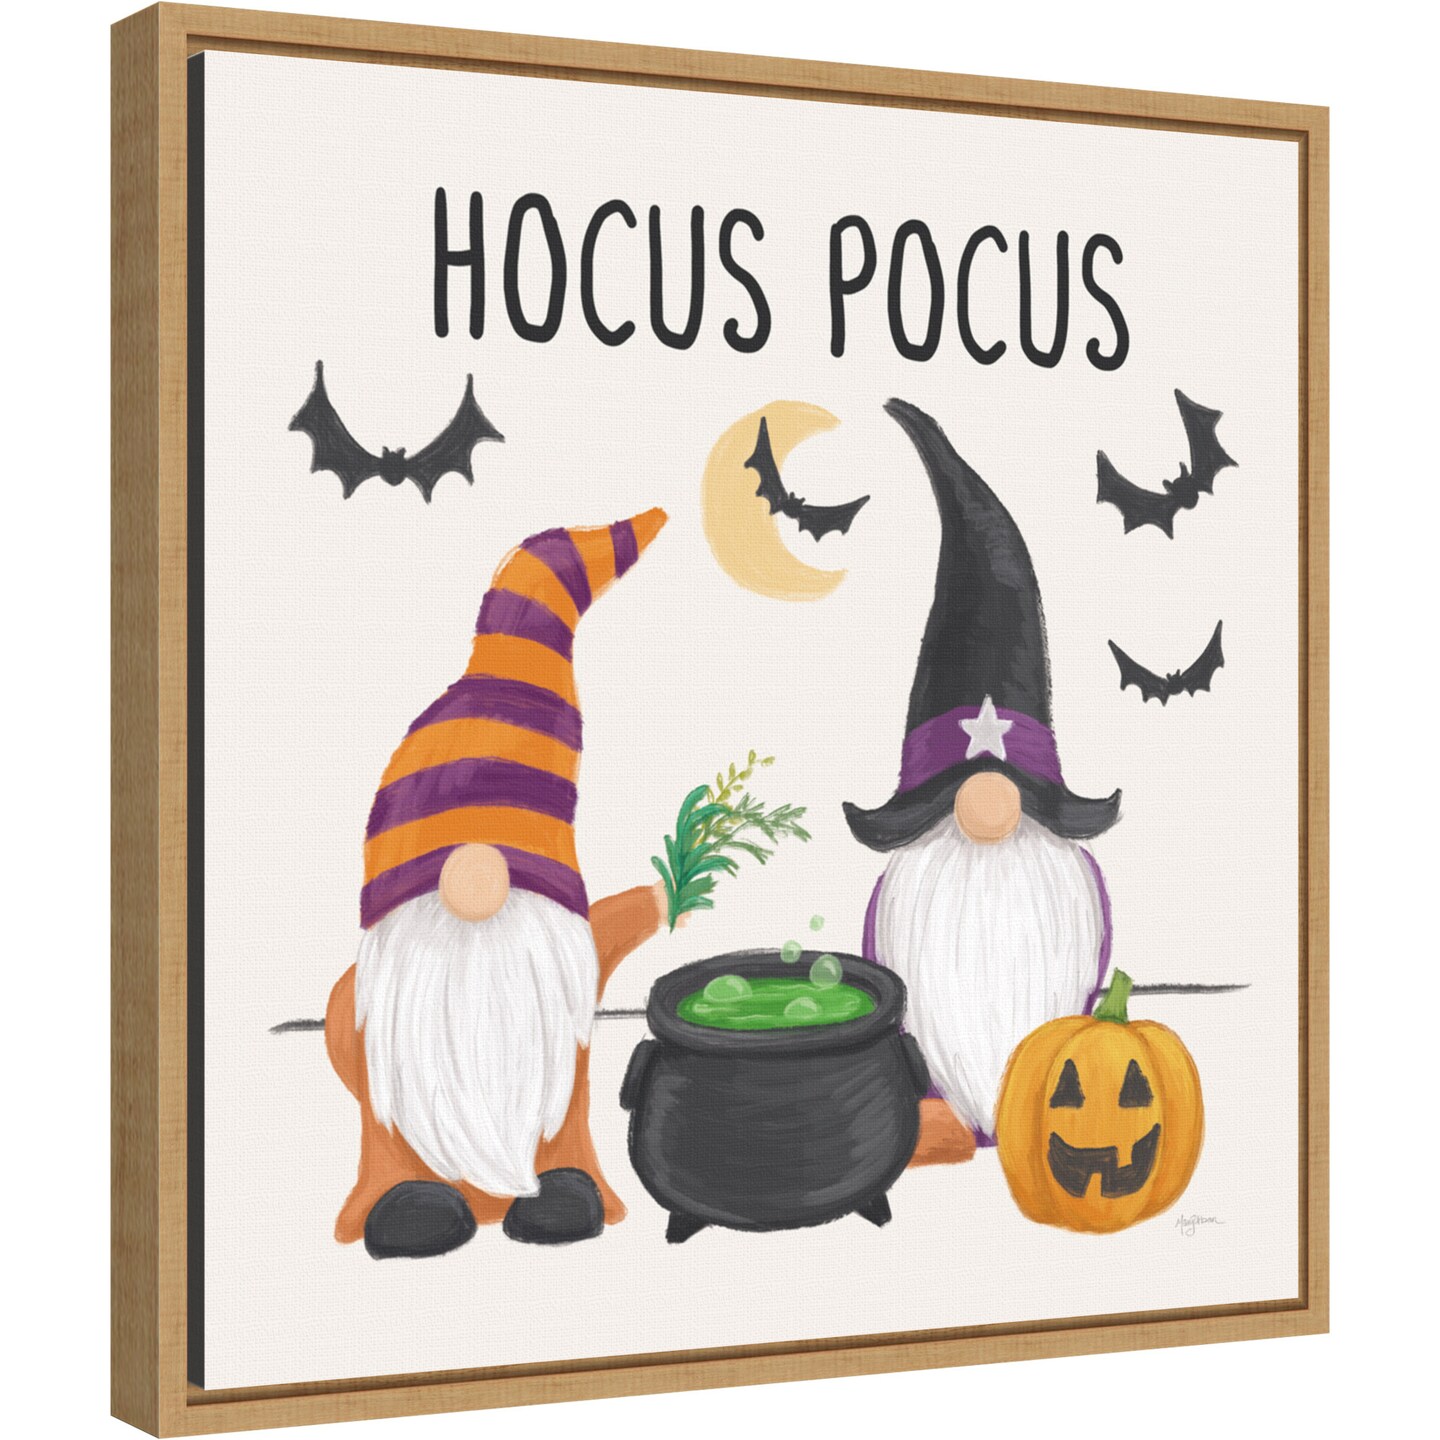 Halloween Gnomes II by Mary Urban 16-in. W x 16-in. H. Canvas Wall Art Print Framed in Natural